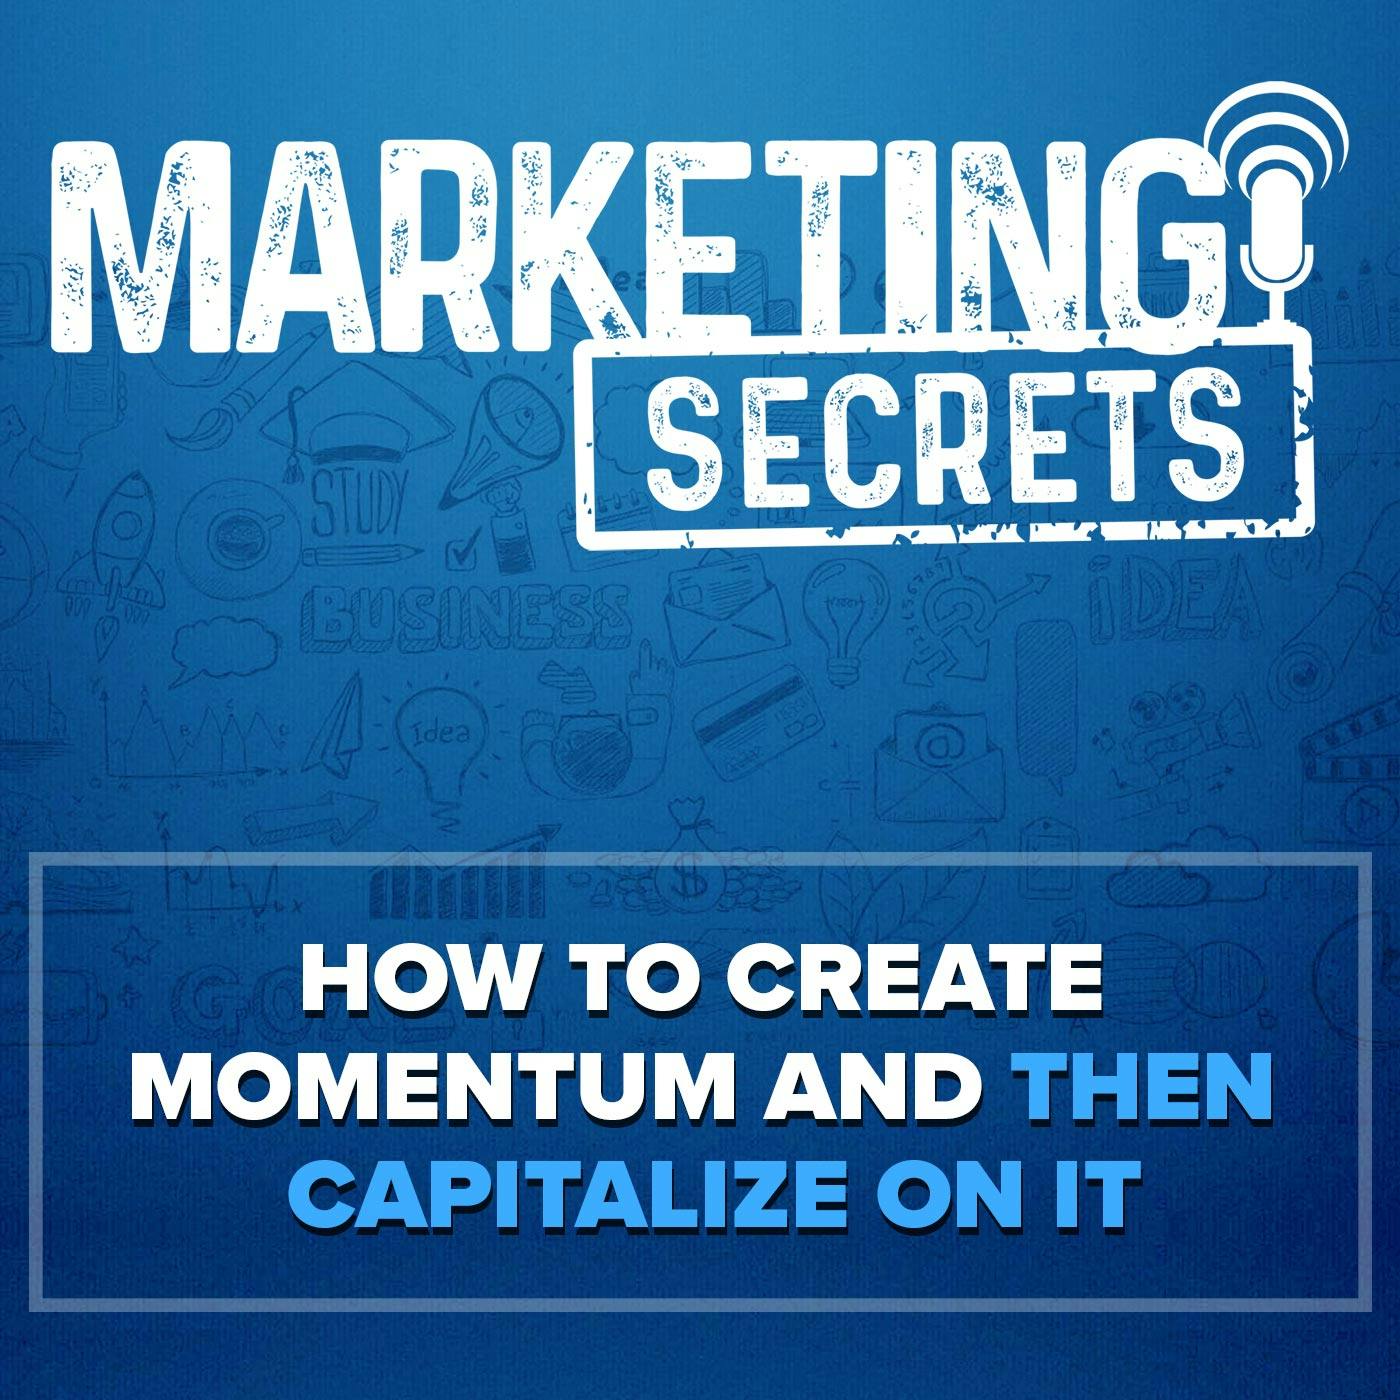 How to Create Momentum and Then Capitalize on It